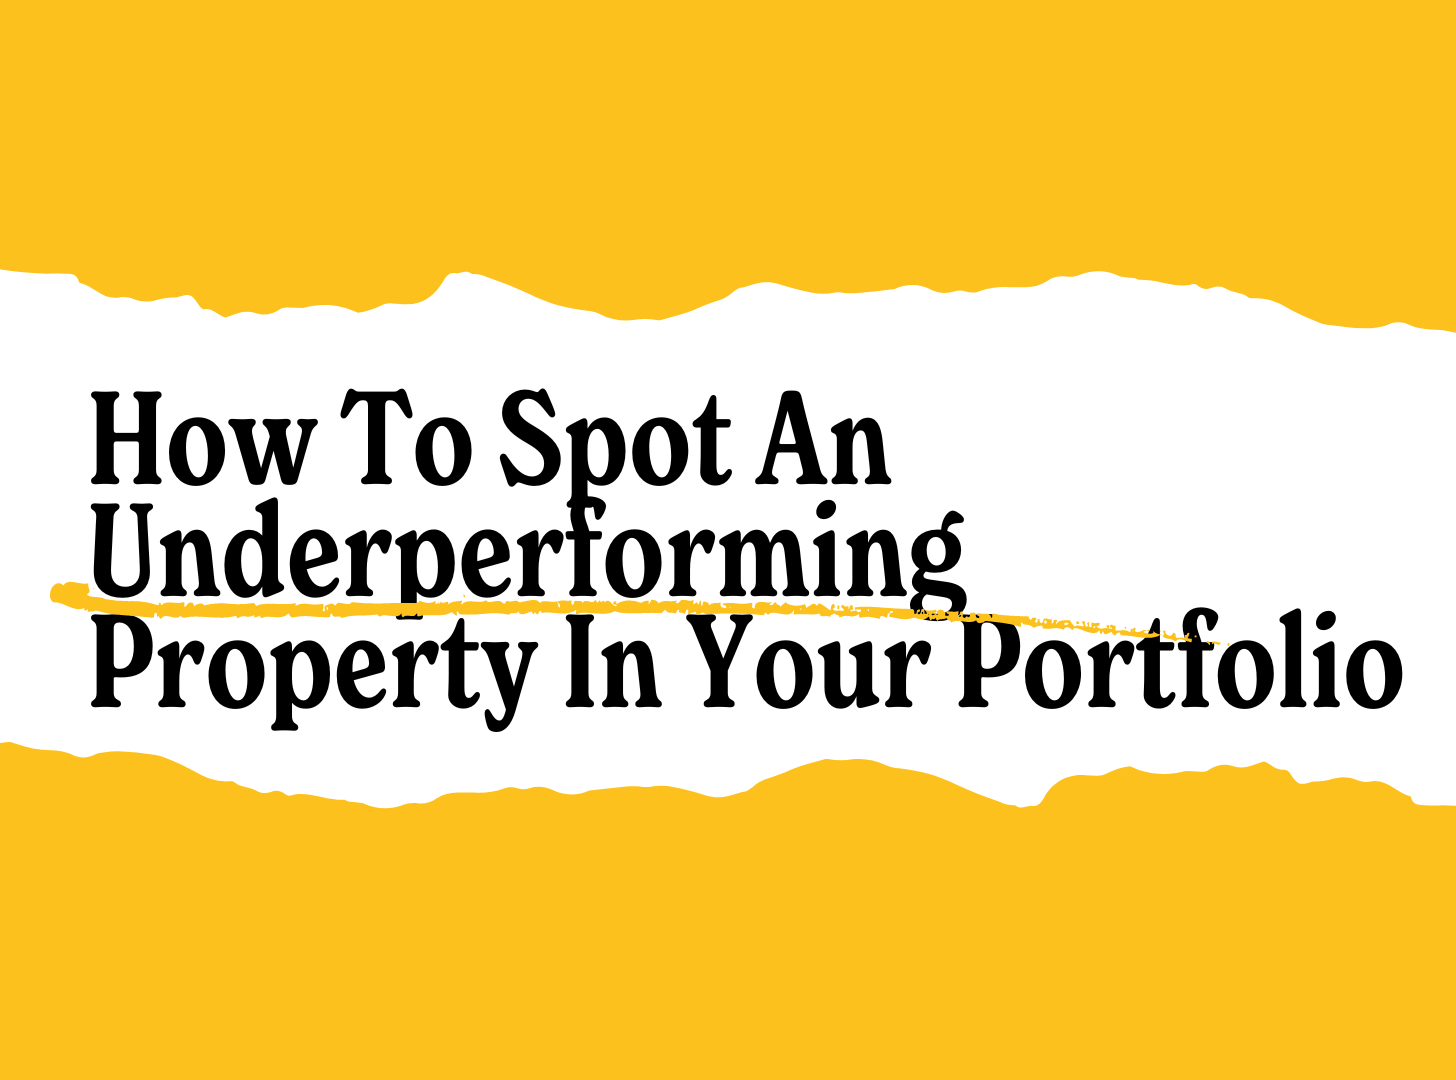 How To Spot An Underperforming Property In Your Portfolio